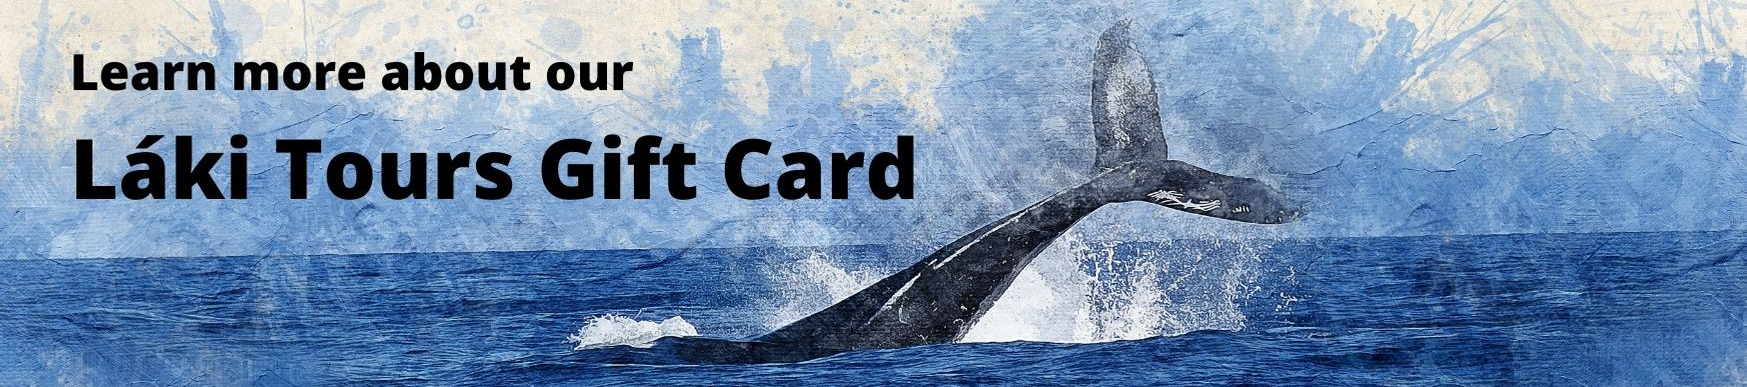 Láki Tours Iceland Gift Card Whale Watching